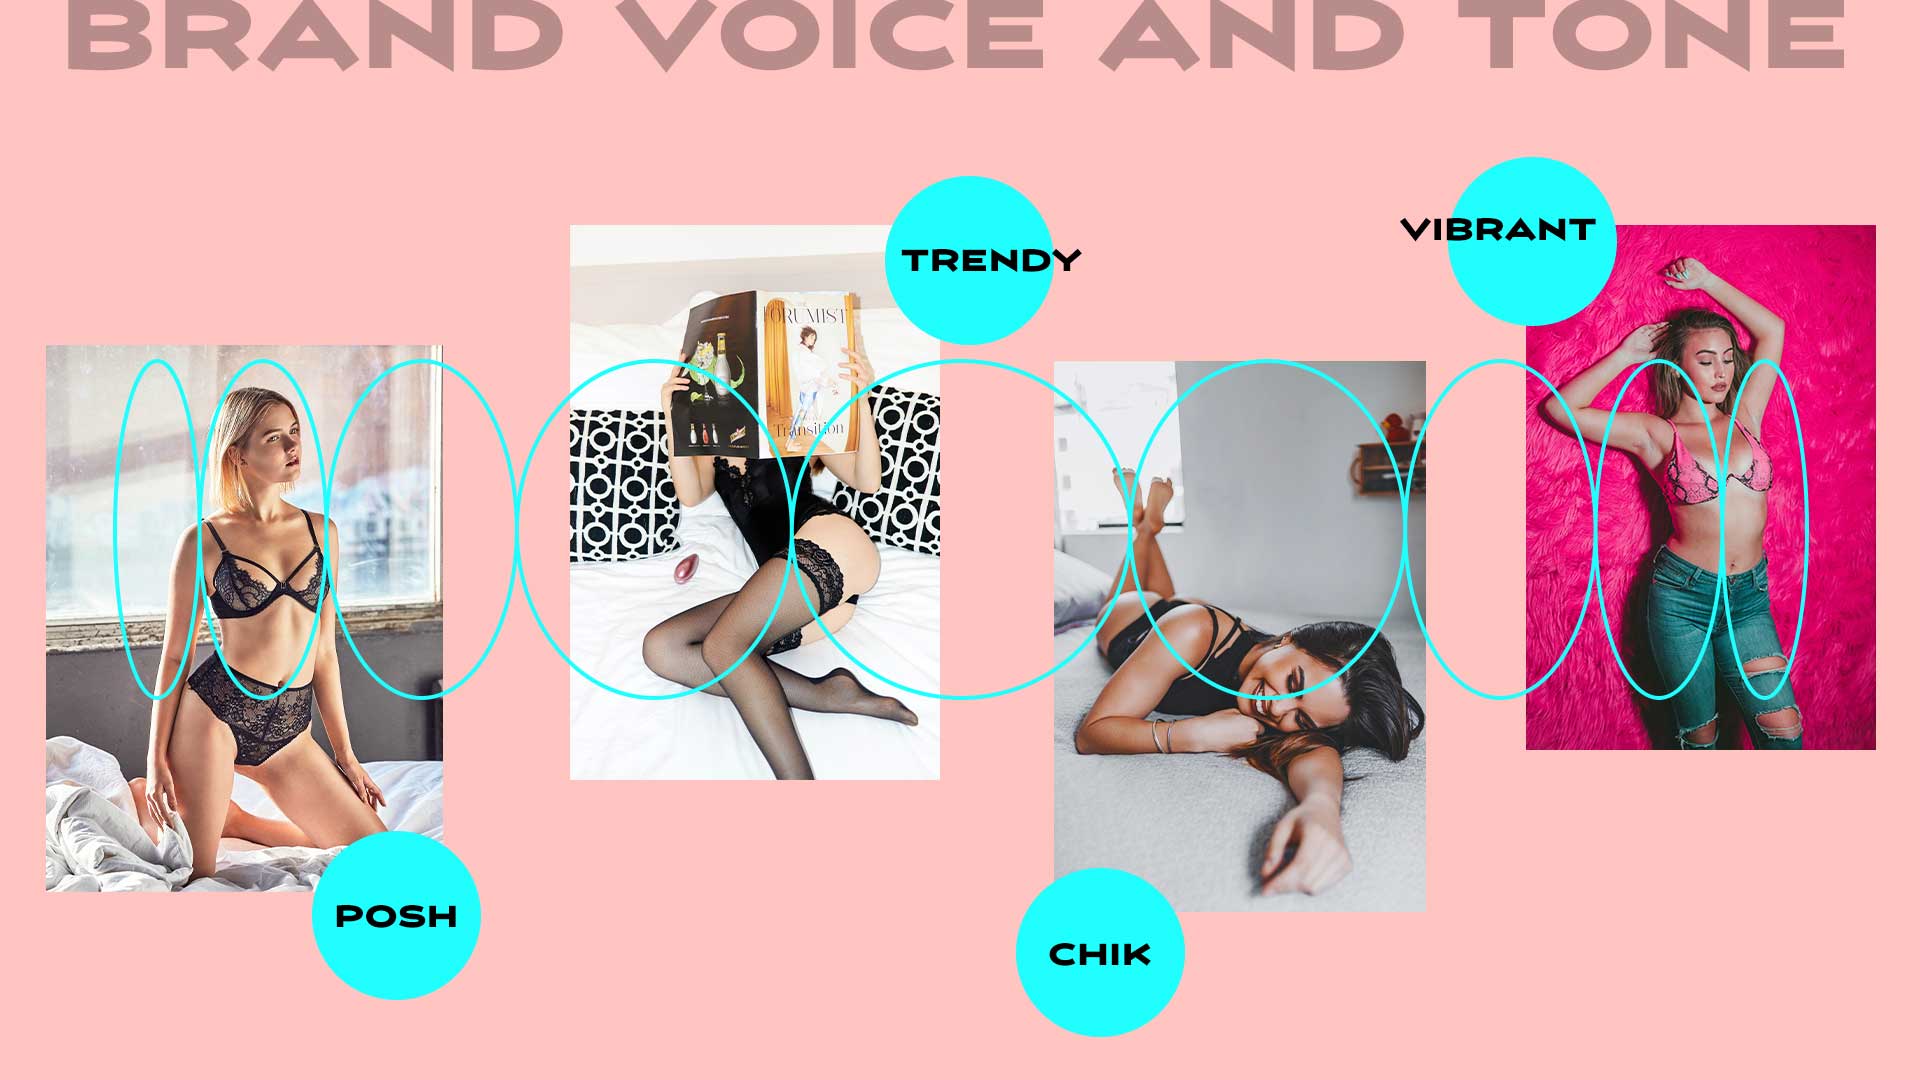 The Fashion Net Brand Voice and Tone